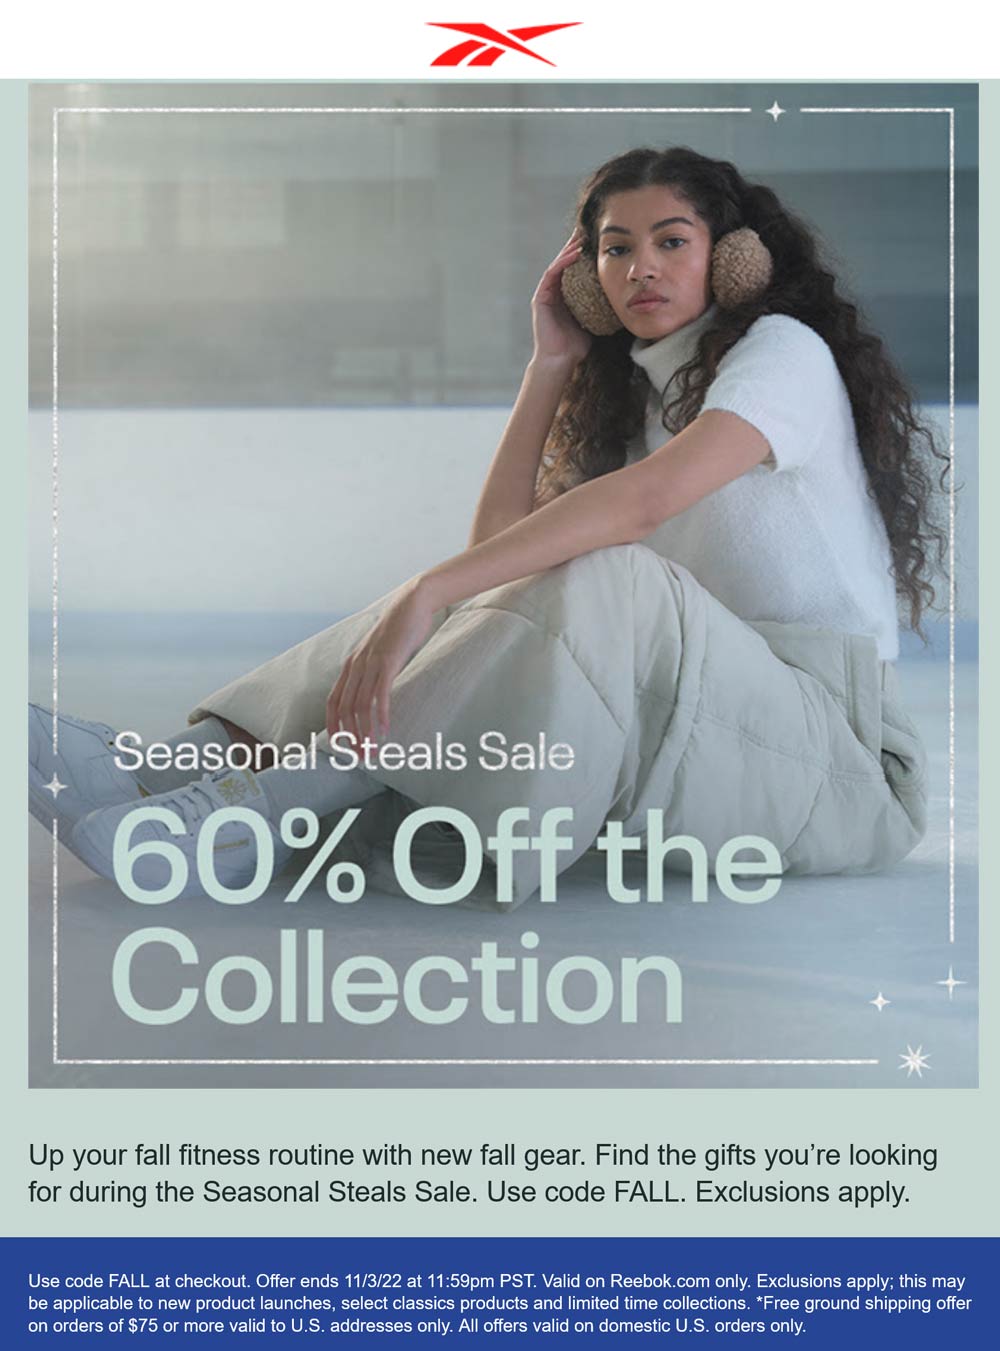 Reebok stores Coupon  60% off the collection online at Reebok via promo code FALL #reebok 